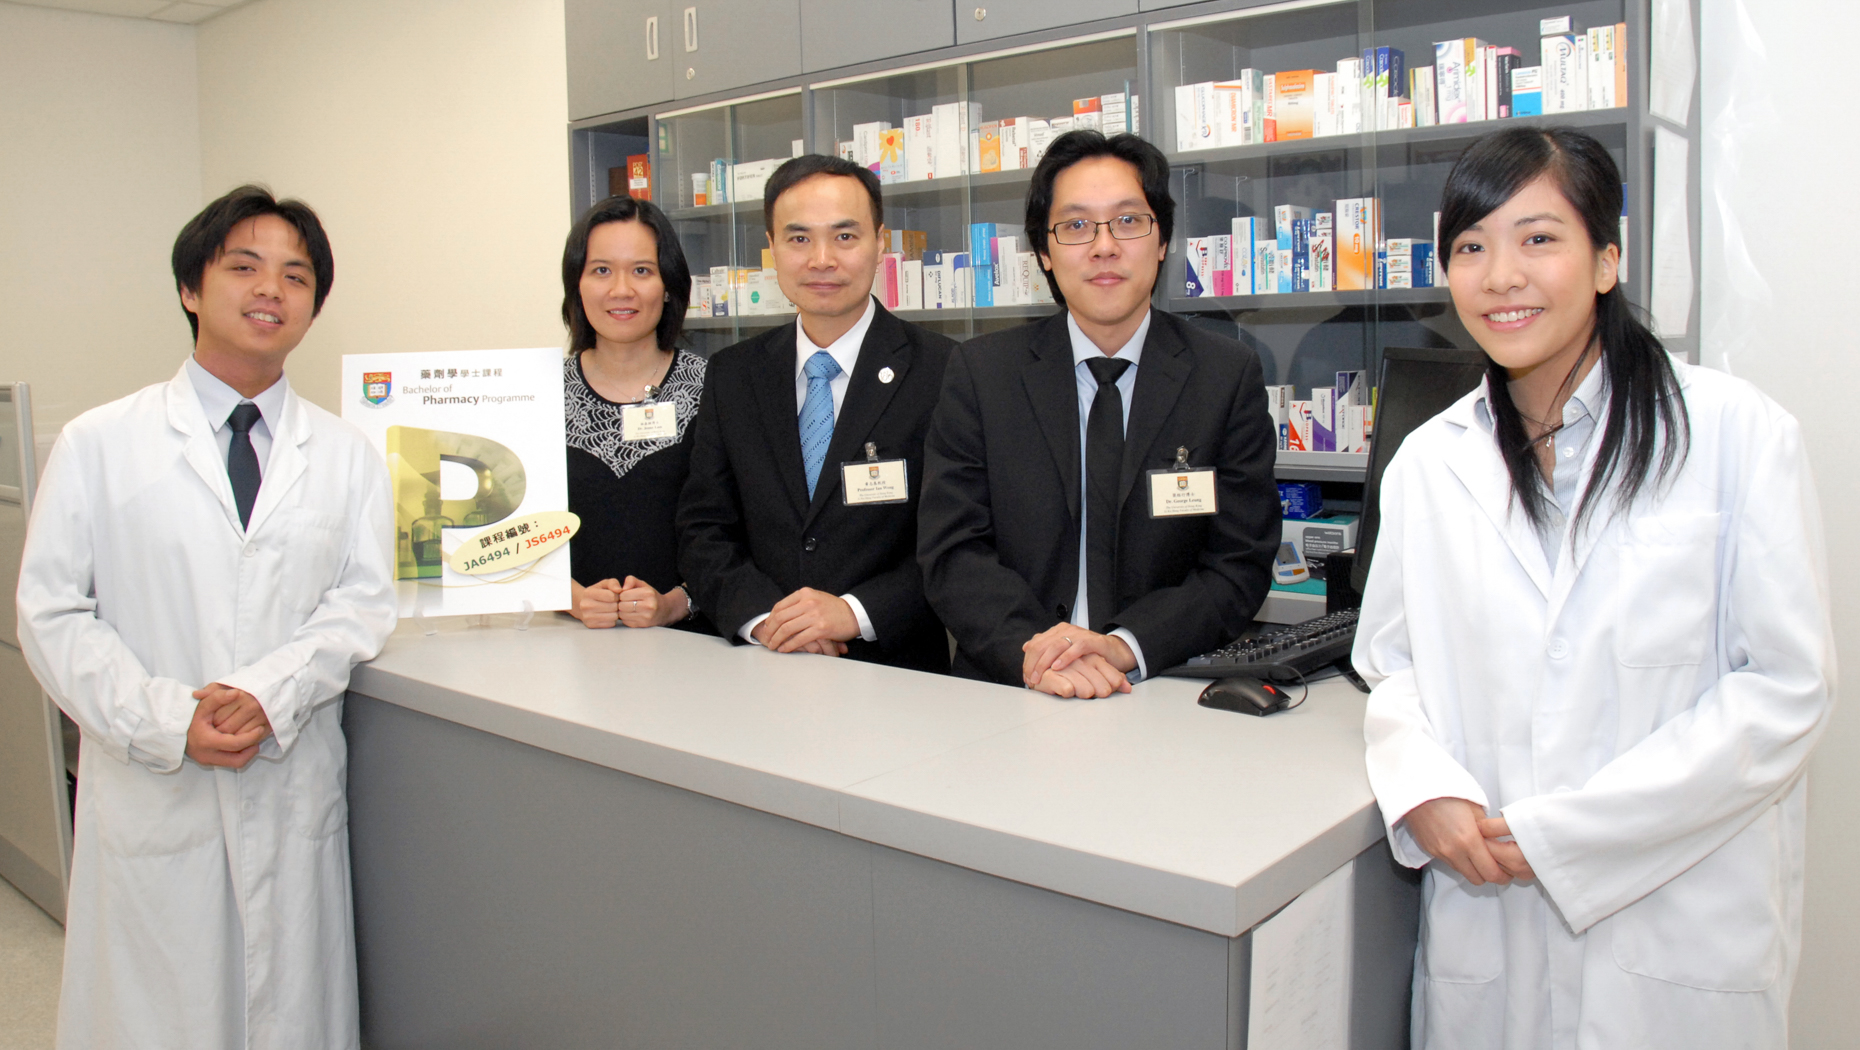 Bachelor of Pharmacy programme launched